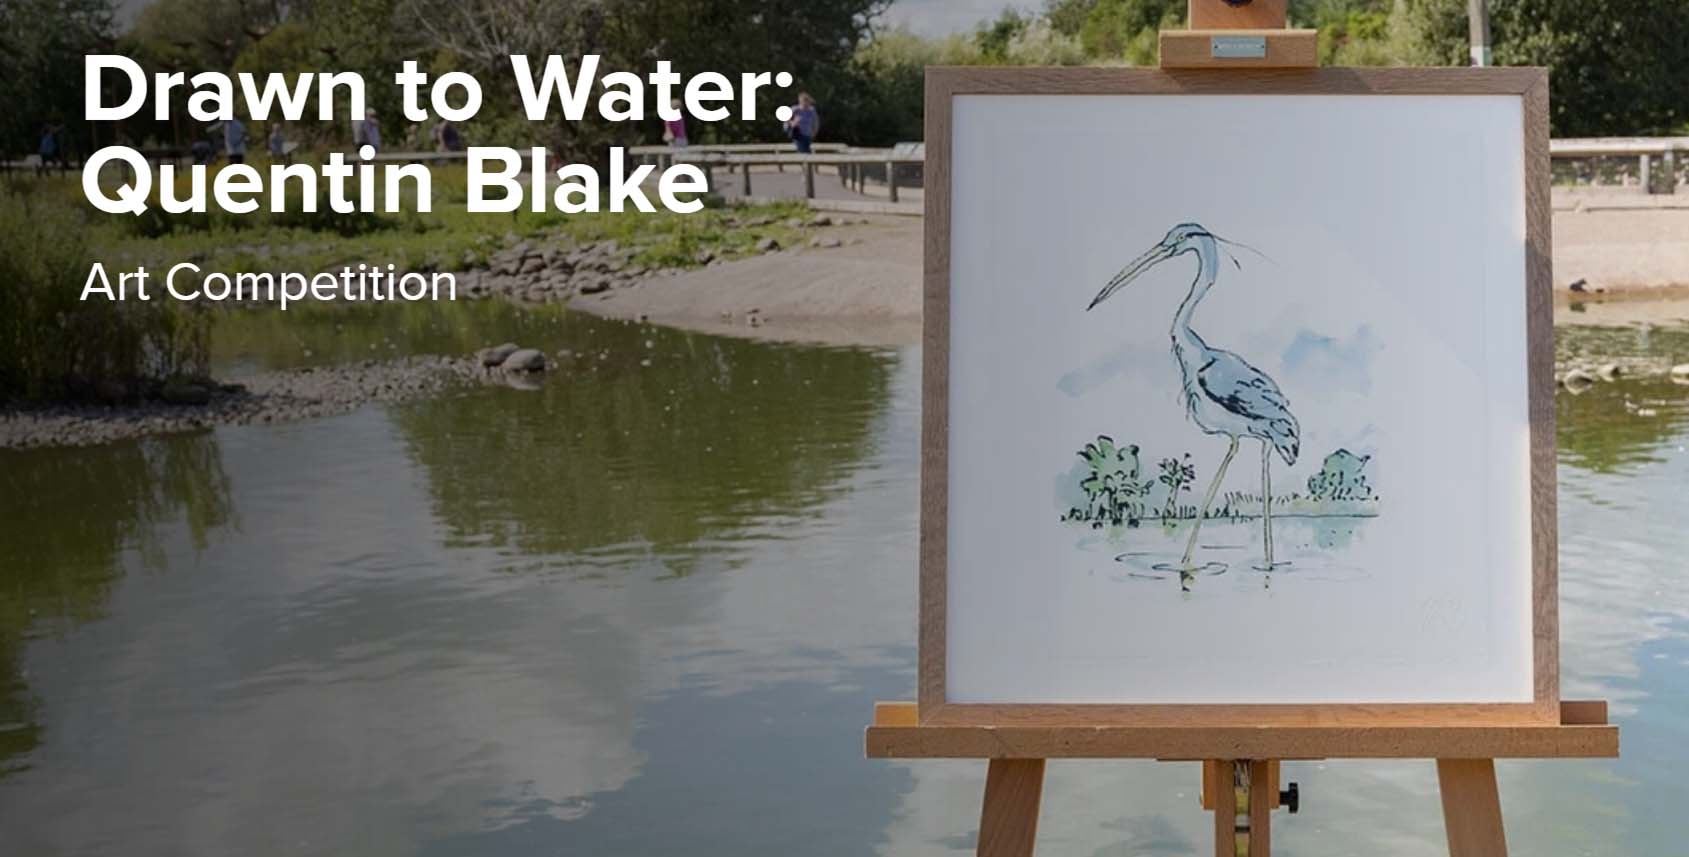 Enter the Quentin Blake: Drawn to Water art competition with WWT